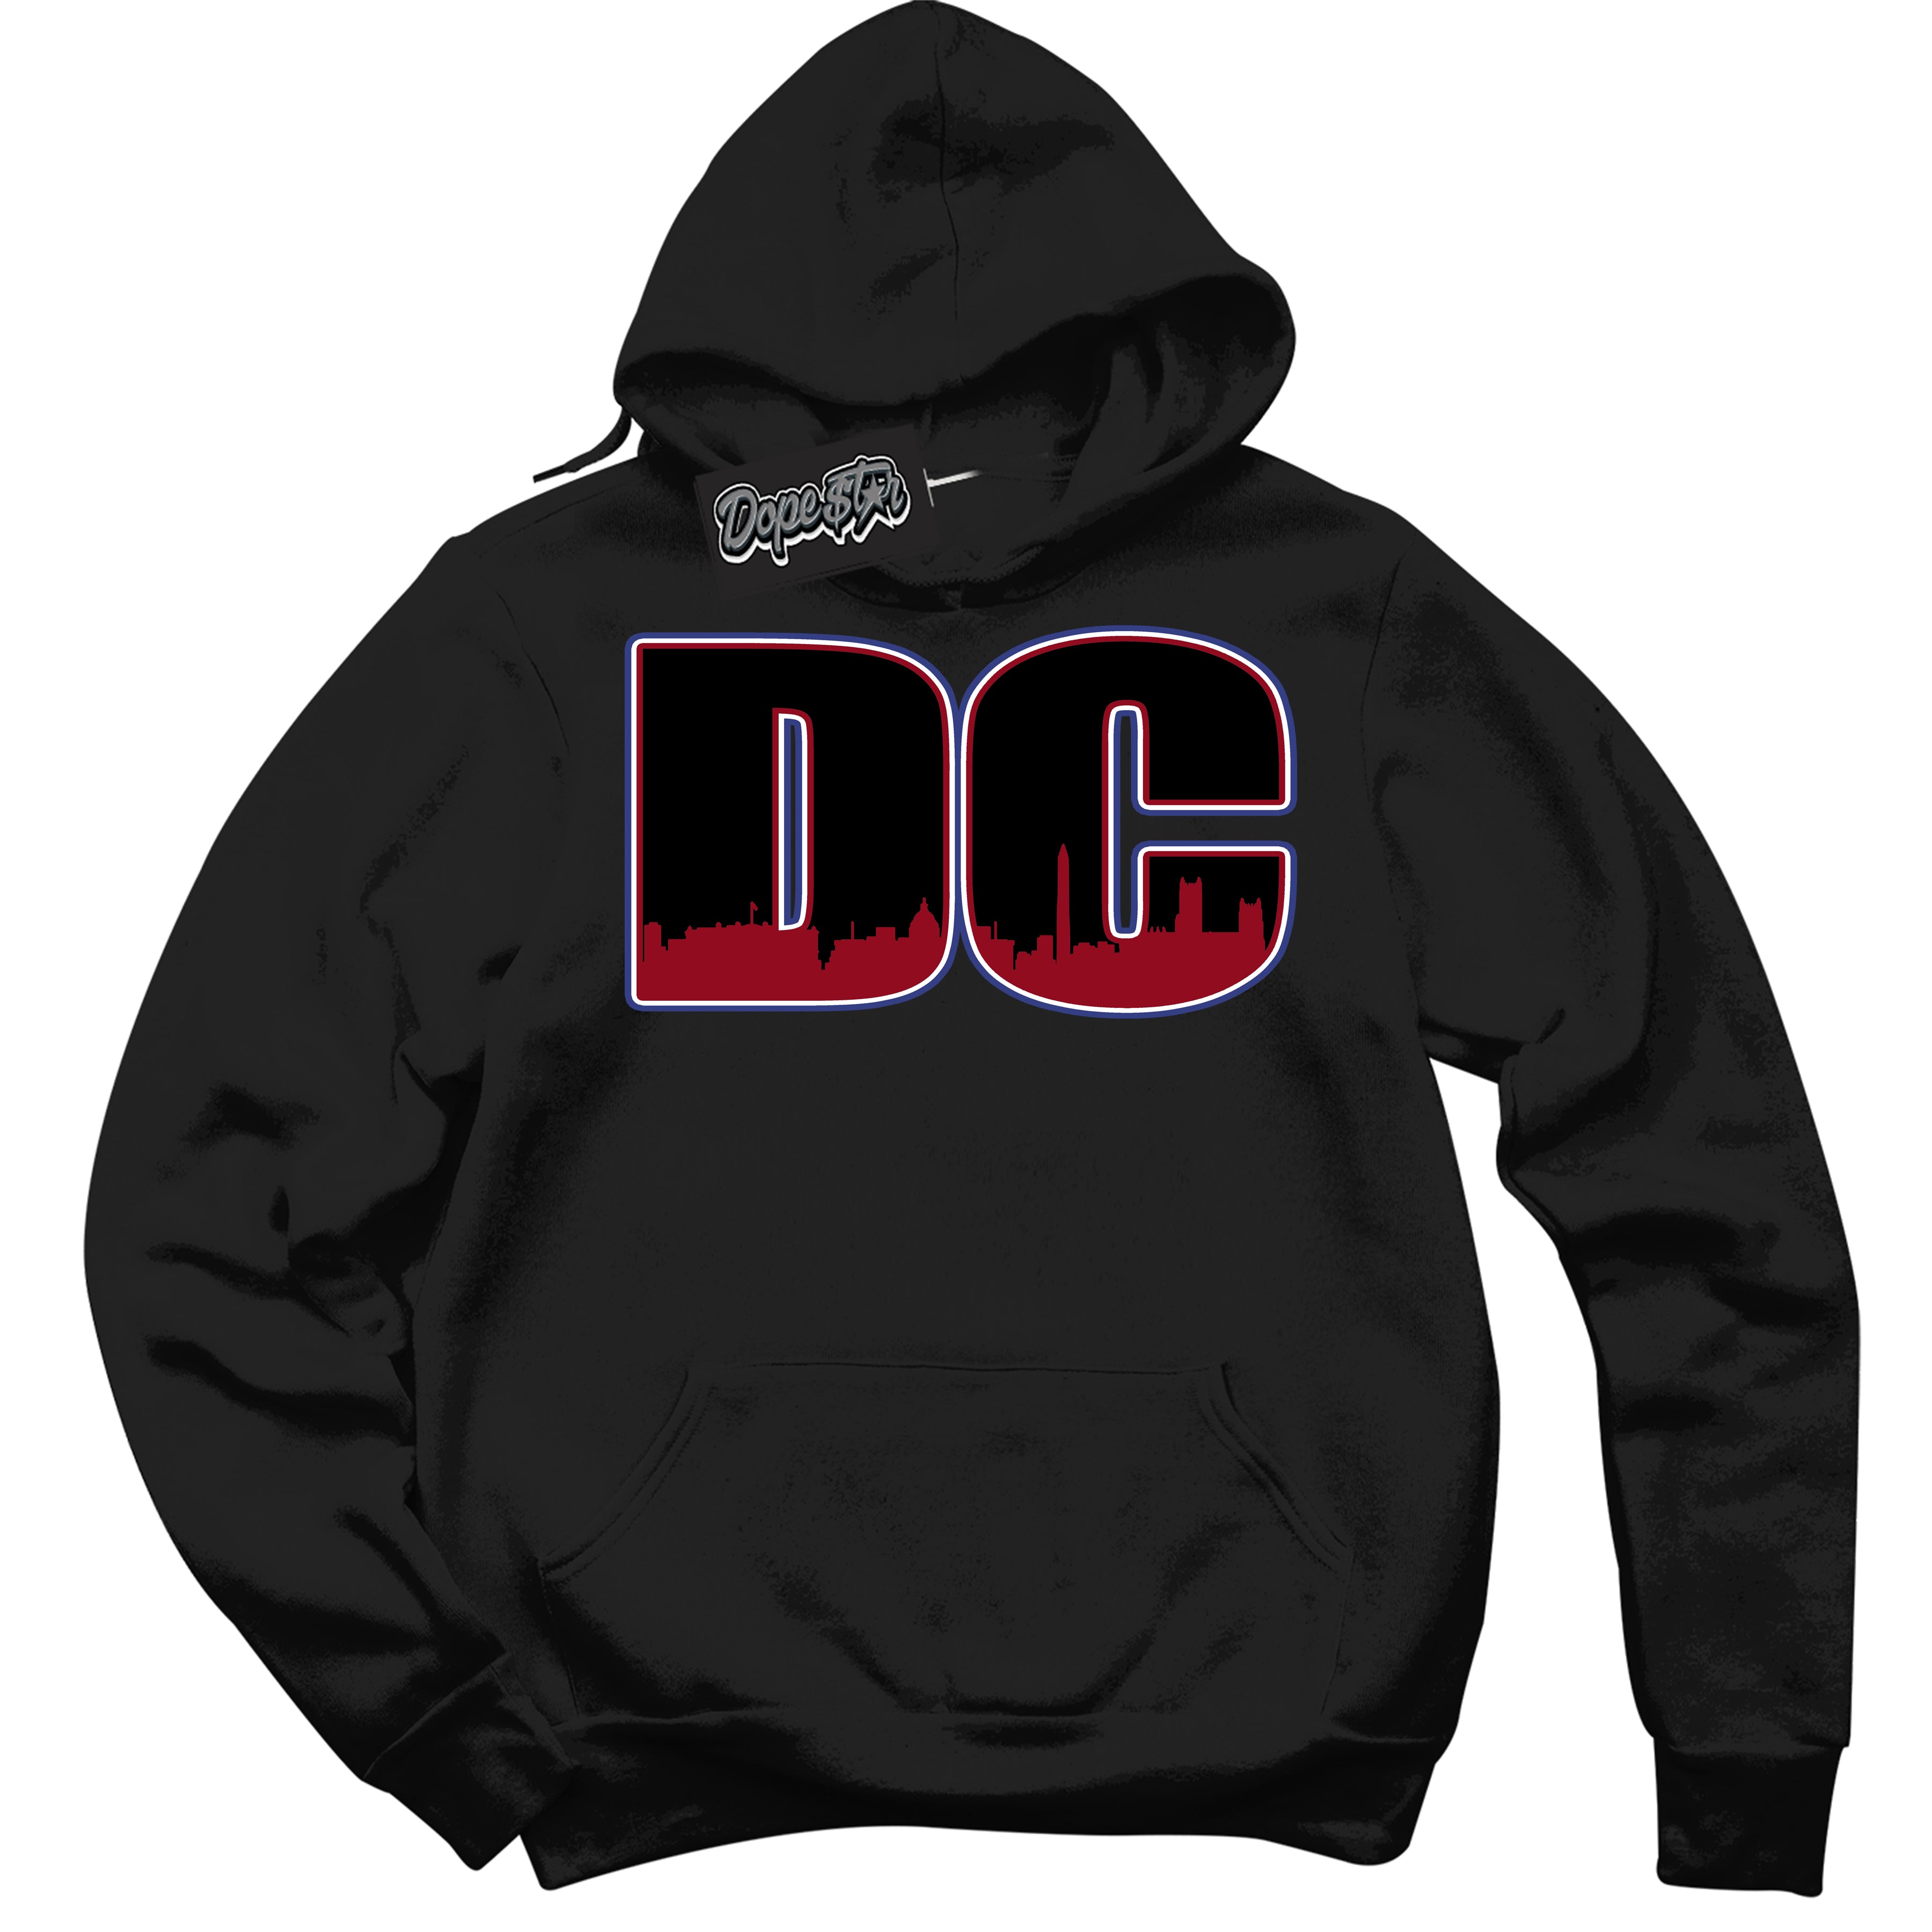 Cool Black Hoodie with “ DC ”  design that Perfectly Matches Playoffs 8s Sneakers.